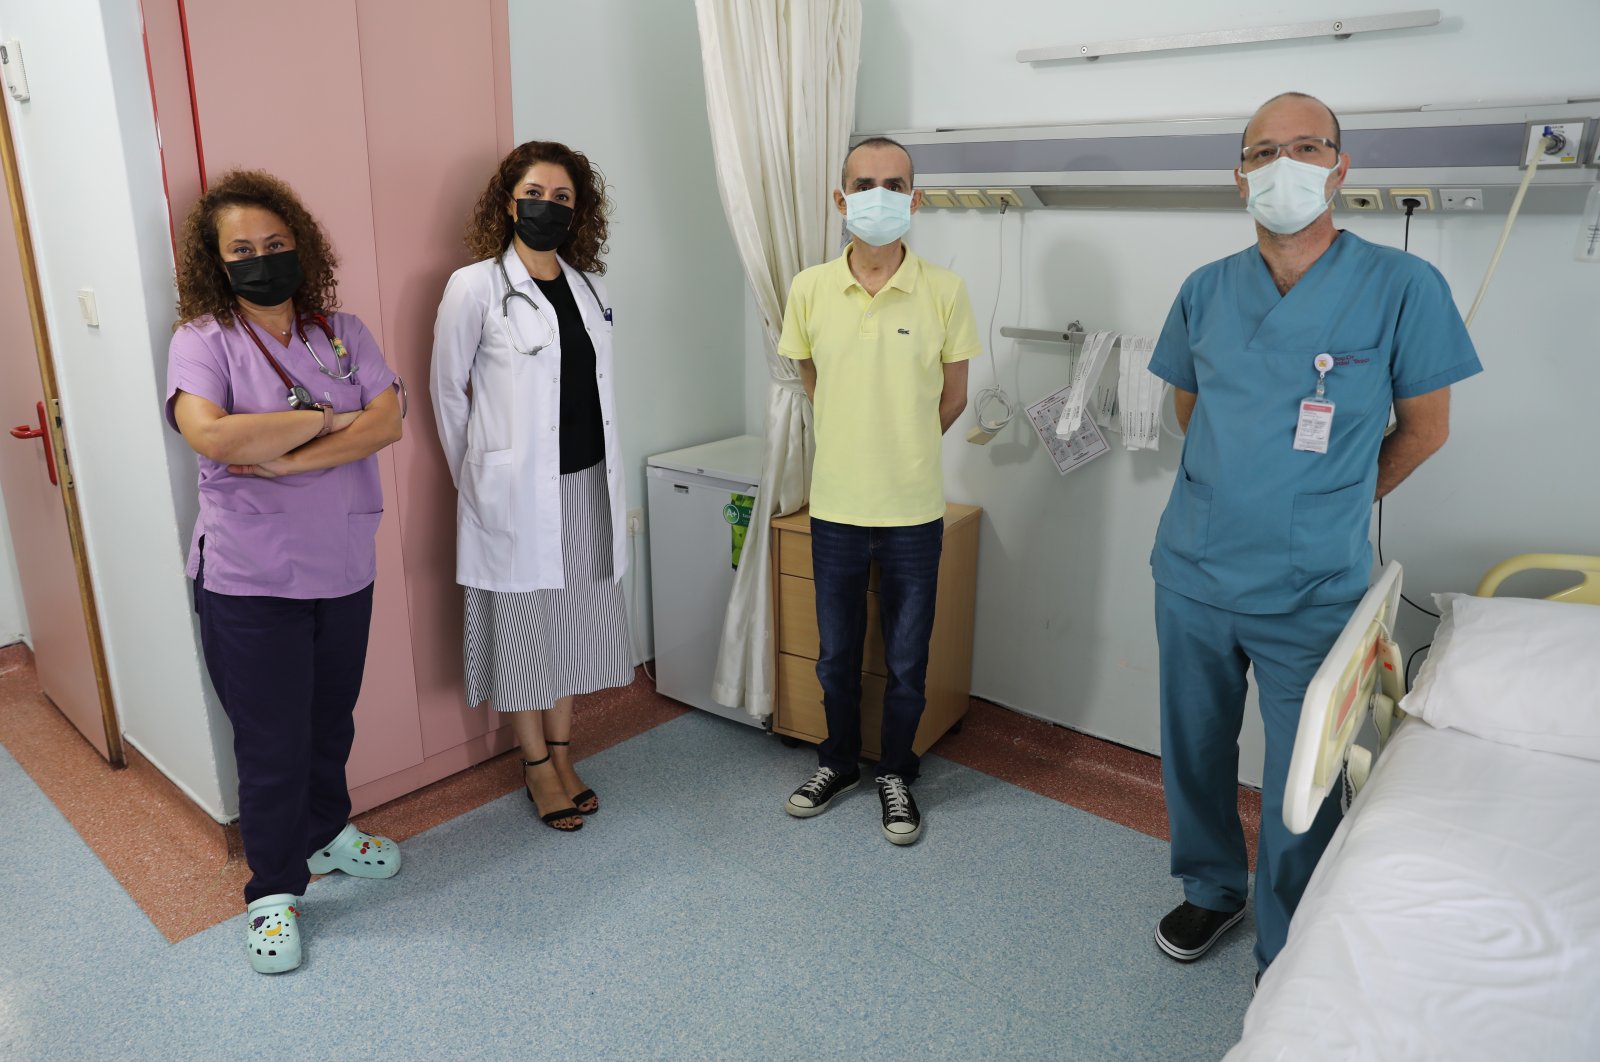 Erhan Yardımcı (2nd R) poses with the medical staff at the Kartal Koşuyolu High Speciality Educational and Research Hospital, where he received treatment, in Istanbul, Turkey, Aug. 31, 2021. (AA Photo)